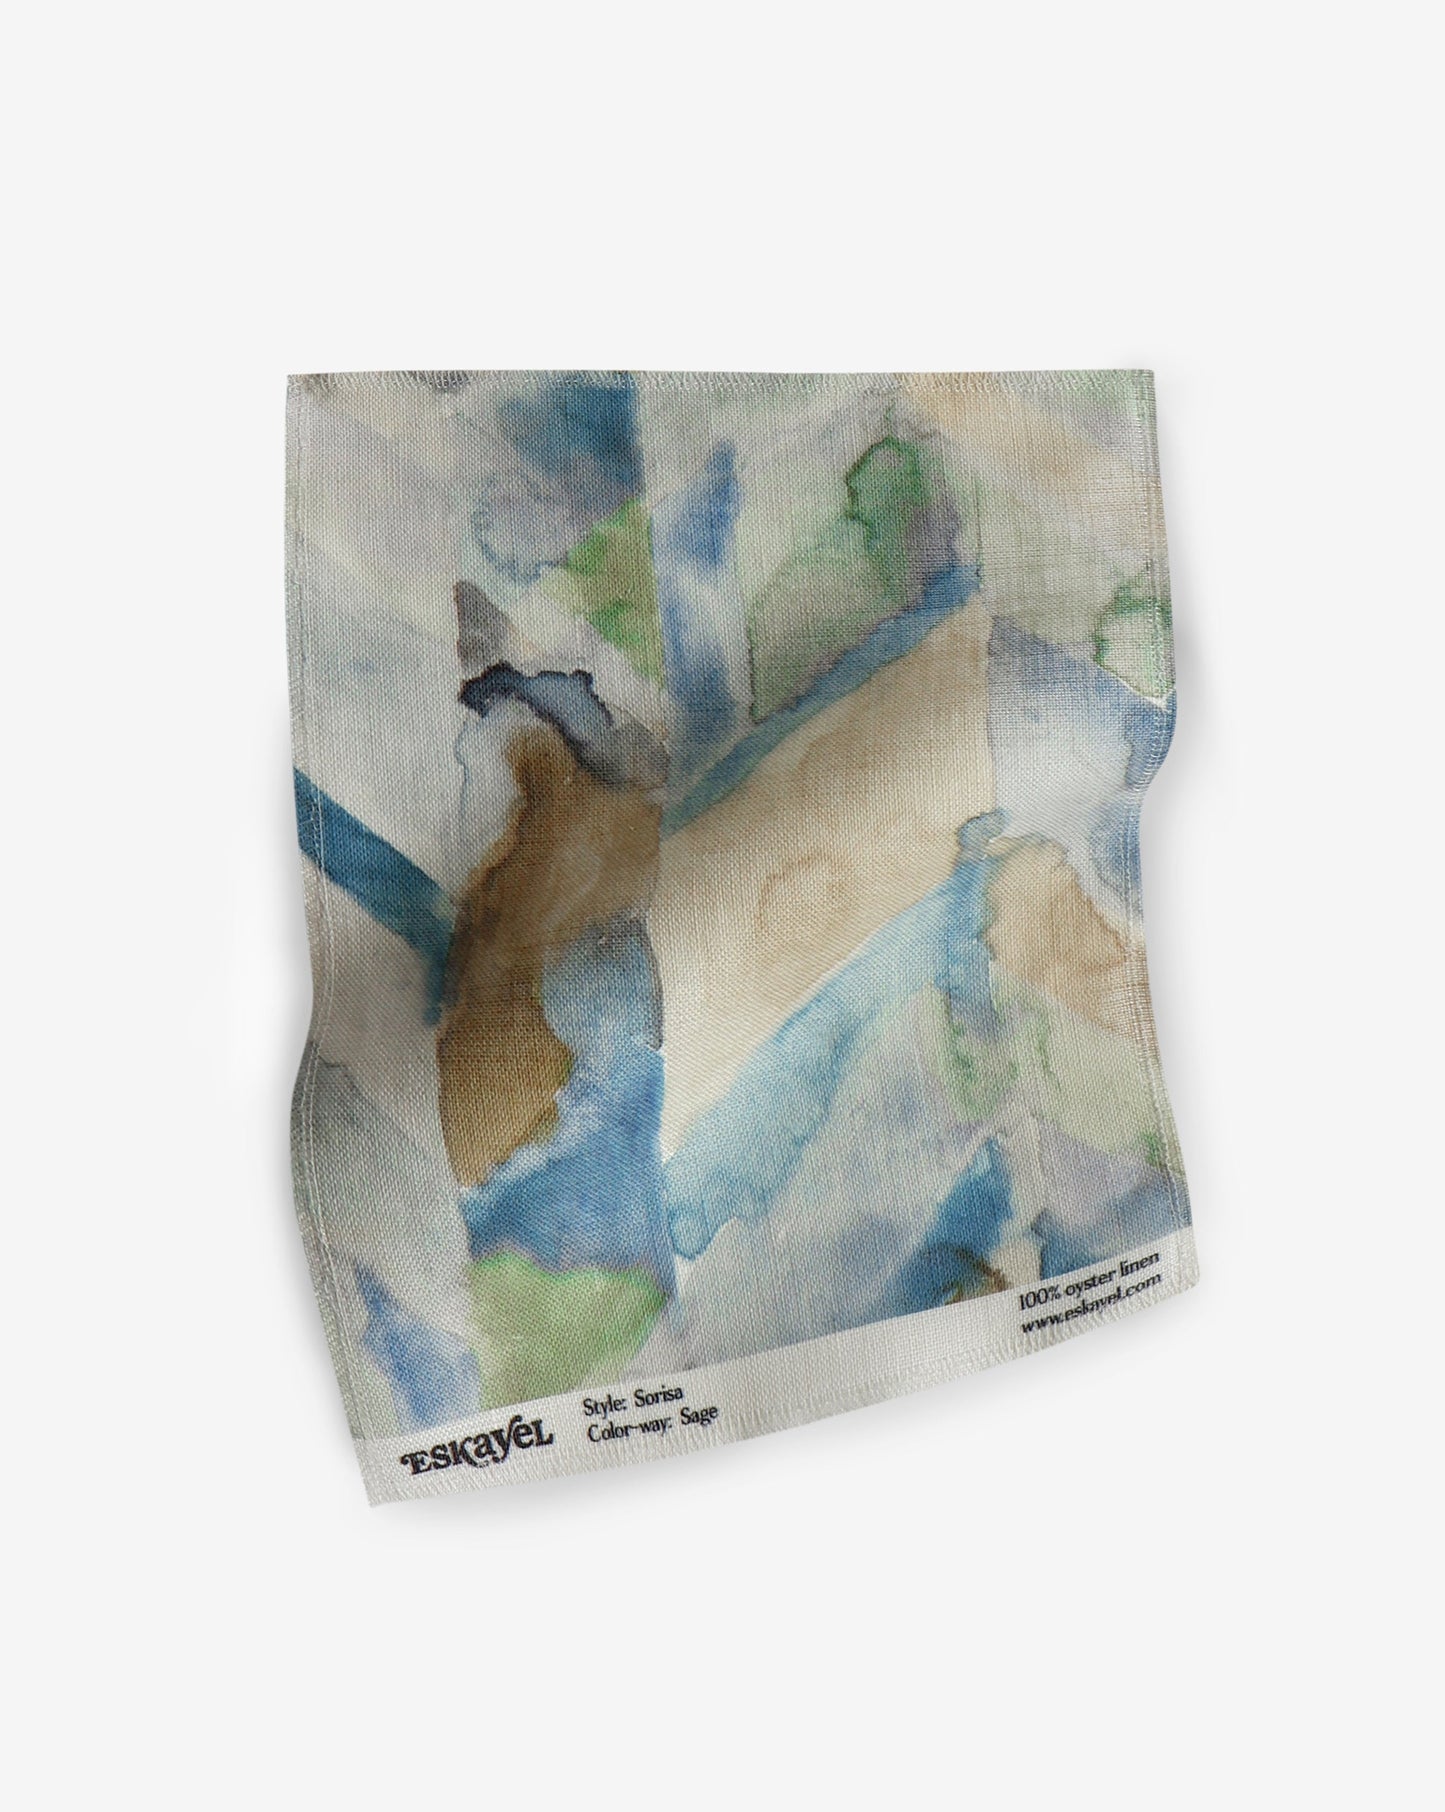 A Sorisa Fabric Sample Sage bag with a watercolor painting on it